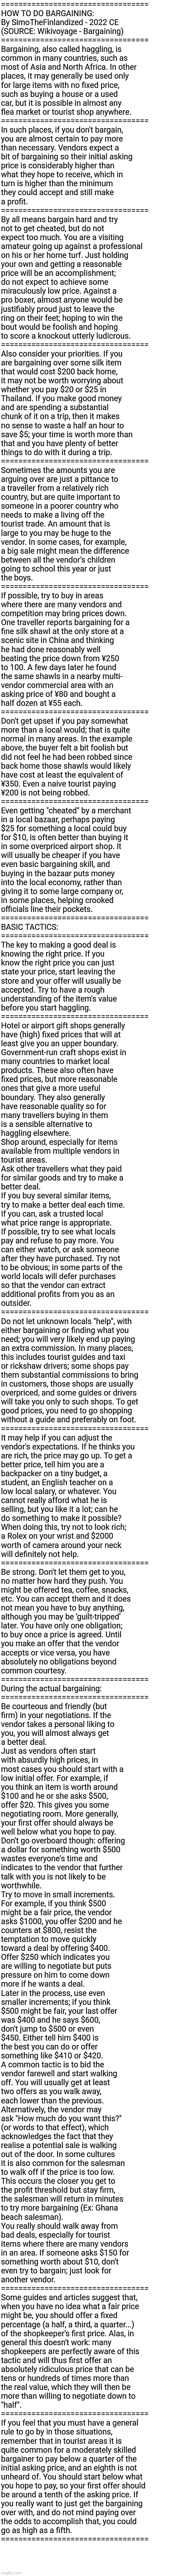 HOW TO DO BARGAINING: By SimoTheFinlandized - 2022 CE (SOURCE: Wikivoyage - Bargaining) | ==================================
HOW TO DO BARGAINING:
By SimoTheFinlandized - 2022 CE
(SOURCE: Wikivoyage - Bargaining)
==================================
Bargaining, also called haggling, is 
common in many countries, such as 
most of Asia and North Africa. In other 
places, it may generally be used only 
for large items with no fixed price, 
such as buying a house or a used 
car, but it is possible in almost any 
flea market or tourist shop anywhere. 
==================================
In such places, if you don't bargain, 
you are almost certain to pay more 
than necessary. Vendors expect a 
bit of bargaining so their initial asking 
price is considerably higher than 
what they hope to receive, which in 
turn is higher than the minimum 
they could accept and still make 
a profit.
==================================
By all means bargain hard and try 
not to get cheated, but do not 
expect too much. You are a visiting 
amateur going up against a professional 
on his or her home turf. Just holding 
your own and getting a reasonable 
price will be an accomplishment; 
do not expect to achieve some 
miraculously low price. Against a 
pro boxer, almost anyone would be
justifiably proud just to leave the 
ring on their feet; hoping to win the 
bout would be foolish and hoping 
to score a knockout utterly ludicrous.
==================================
Also consider your priorities. If you 
are bargaining over some silk item 
that would cost $200 back home,
it may not be worth worrying about 
whether you pay $20 or $25 in 
Thailand. If you make good money 
and are spending a substantial 
chunk of it on a trip, then it makes 
no sense to waste a half an hour to 
save $5; your time is worth more than 
that and you have plenty of better 
things to do with it during a trip.
==================================
Sometimes the amounts you are 
arguing over are just a pittance to 
a traveller from a relatively rich 
country, but are quite important to 
someone in a poorer country who 
needs to make a living off the 
tourist trade. An amount that is 
large to you may be huge to the 
vendor. In some cases, for example, 
a big sale might mean the difference 
between all the vendor's children 
going to school this year or just 
the boys.
==================================
If possible, try to buy in areas 
where there are many vendors and 
competition may bring prices down. 
One traveller reports bargaining for a 
fine silk shawl at the only store at a 
scenic site in China and thinking 
he had done reasonably well 
beating the price down from ¥250 
to 100. A few days later he found 
the same shawls in a nearby multi-
vendor commercial area with an 
asking price of ¥80 and bought a 
half dozen at ¥55 each.
==================================
Don't get upset if you pay somewhat 
more than a local would; that is quite 
normal in many areas. In the example 
above, the buyer felt a bit foolish but 
did not feel he had been robbed since 
back home those shawls would likely 
have cost at least the equivalent of 
¥350. Even a naive tourist paying 
¥200 is not being robbed.
==================================
Even getting "cheated" by a merchant 
in a local bazaar, perhaps paying 
$25 for something a local could buy 
for $10, is often better than buying it 
in some overpriced airport shop. It 
will usually be cheaper if you have 
even basic bargaining skill, and 
buying in the bazaar puts money 
into the local economy, rather than 
giving it to some large company or, 
in some places, helping crooked 
officials line their pockets.
==================================
BASIC TACTICS:
==================================
The key to making a good deal is 
knowing the right price. If you 
know the right price you can just 
state your price, start leaving the 
store and your offer will usually be 
accepted. Try to have a rough 
understanding of the item's value 
before you start haggling.
==================================
Hotel or airport gift shops generally 
have (high) fixed prices that will at 
least give you an upper boundary.
Government-run craft shops exist in 
many countries to market local 
products. These also often have 
fixed prices, but more reasonable 
ones that give a more useful 
boundary. They also generally 
have reasonable quality so for 
many travellers buying in them 
is a sensible alternative to 
haggling elsewhere.
Shop around, especially for items 
available from multiple vendors in 
tourist areas.
Ask other travellers what they paid 
for similar goods and try to make a 
better deal.
If you buy several similar items, 
try to make a better deal each time.
If you can, ask a trusted local 
what price range is appropriate.
If possible, try to see what locals 
pay and refuse to pay more. You 
can either watch, or ask someone 
after they have purchased. Try not 
to be obvious; in some parts of the
world locals will defer purchases 
so that the vendor can extract 
additional profits from you as an
outsider.
==================================
Do not let unknown locals "help", with 
either bargaining or finding what you 
need; you will very likely end up paying 
an extra commission. In many places, 
this includes tourist guides and taxi 
or rickshaw drivers; some shops pay 
them substantial commissions to bring 
in customers, those shops are usually 
overpriced, and some guides or drivers 
will take you only to such shops. To get 
good prices, you need to go shopping 
without a guide and preferably on foot.
==================================
It may help if you can adjust the 
vendor's expectations. If he thinks you 
are rich, the price may go up. To get a 
better price, tell him you are a 
backpacker on a tiny budget, a 
student, an English teacher on a 
low local salary, or whatever. You 
cannot really afford what he is 
selling, but you like it a lot; can he 
do something to make it possible? 
When doing this, try not to look rich; 
a Rolex on your wrist and $2000
worth of camera around your neck 
will definitely not help.
==================================
Be strong. Don't let them get to you, 
no matter how hard they push. You 
might be offered tea, coffee, snacks, 
etc. You can accept them and it does 
not mean you have to buy anything, 
although you may be 'guilt-tripped' 
later. You have only one obligation; 
to buy once a price is agreed. Until 
you make an offer that the vendor 
accepts or vice versa, you have 
absolutely no obligations beyond 
common courtesy.
==================================
During the actual bargaining:
==================================
Be courteous and friendly (but 
firm) in your negotiations. If the 
vendor takes a personal liking to 
you, you will almost always get 
a better deal.
Just as vendors often start 
with absurdly high prices, in 
most cases you should start with a 
low initial offer. For example, if 
you think an item is worth around 
$100 and he or she asks $500, 
offer $20. This gives you some 
negotiating room. More generally, 
your first offer should always be 
well below what you hope to pay. 
Don't go overboard though: offering
a dollar for something worth $500 
wastes everyone's time and 
indicates to the vendor that further 
talk with you is not likely to be 
worthwhile.
Try to move in small increments. 
For example, if you think $500 
might be a fair price, the vendor 
asks $1000, you offer $200 and he 
counters at $800, resist the 
temptation to move quickly
toward a deal by offering $400. 
Offer $250 which indicates you 
are willing to negotiate but puts 
pressure on him to come down 
more if he wants a deal.
Later in the process, use even 
smaller increments; if you think 
$500 might be fair, your last offer 
was $400 and he says $600, 
don't jump to $500 or even 
$450. Either tell him $400 is 
the best you can do or offer 
something like $410 or $420.
A common tactic is to bid the 
vendor farewell and start walking 
off. You will usually get at least 
two offers as you walk away, 
each lower than the previous. 
Alternatively, the vendor may 
ask "How much do you want this?" 
(or words to that effect), which 
acknowledges the fact that they
realise a potential sale is walking 
out of the door. In some cultures
it is also common for the salesman 
to walk off if the price is too low. 
This occurs the closer you get to 
the profit threshold but stay firm, 
the salesman will return in minutes 
to try more bargaining (Ex: Ghana 
beach salesman).
You really should walk away from 
bad deals, especially for tourist 
items where there are many vendors 
in an area. If someone asks $150 for
something worth about $10, don't 
even try to bargain; just look for
another vendor.
==================================
Some guides and articles suggest that, 
when you have no idea what a fair price 
might be, you should offer a fixed 
percentage (a half, a third, a quarter...) 
of the shopkeeper's first price. Alas, in 
general this doesn't work: many 
shopkeepers are perfectly aware of this 
tactic and will thus first offer an 
absolutely ridiculous price that can be 
tens or hundreds of times more than 
the real value, which they will then be 
more than willing to negotiate down to 
"half".
==================================
If you feel that you must have a general 
rule to go by in those situations, 
remember that in tourist areas it is 
quite common for a moderately skilled 
bargainer to pay below a quarter of the 
initial asking price, and an eighth is not
unheard of. You should start below what 
you hope to pay, so your first offer should 
be around a tenth of the asking price. If 
you really want to just get the bargaining 
over with, and do not mind paying over 
the odds to accomplish that, you could
go as high as a fifth.
================================== | image tagged in simothefinlandized,bargaining,tutorial,treatise,commerce,tips and tricks | made w/ Imgflip meme maker